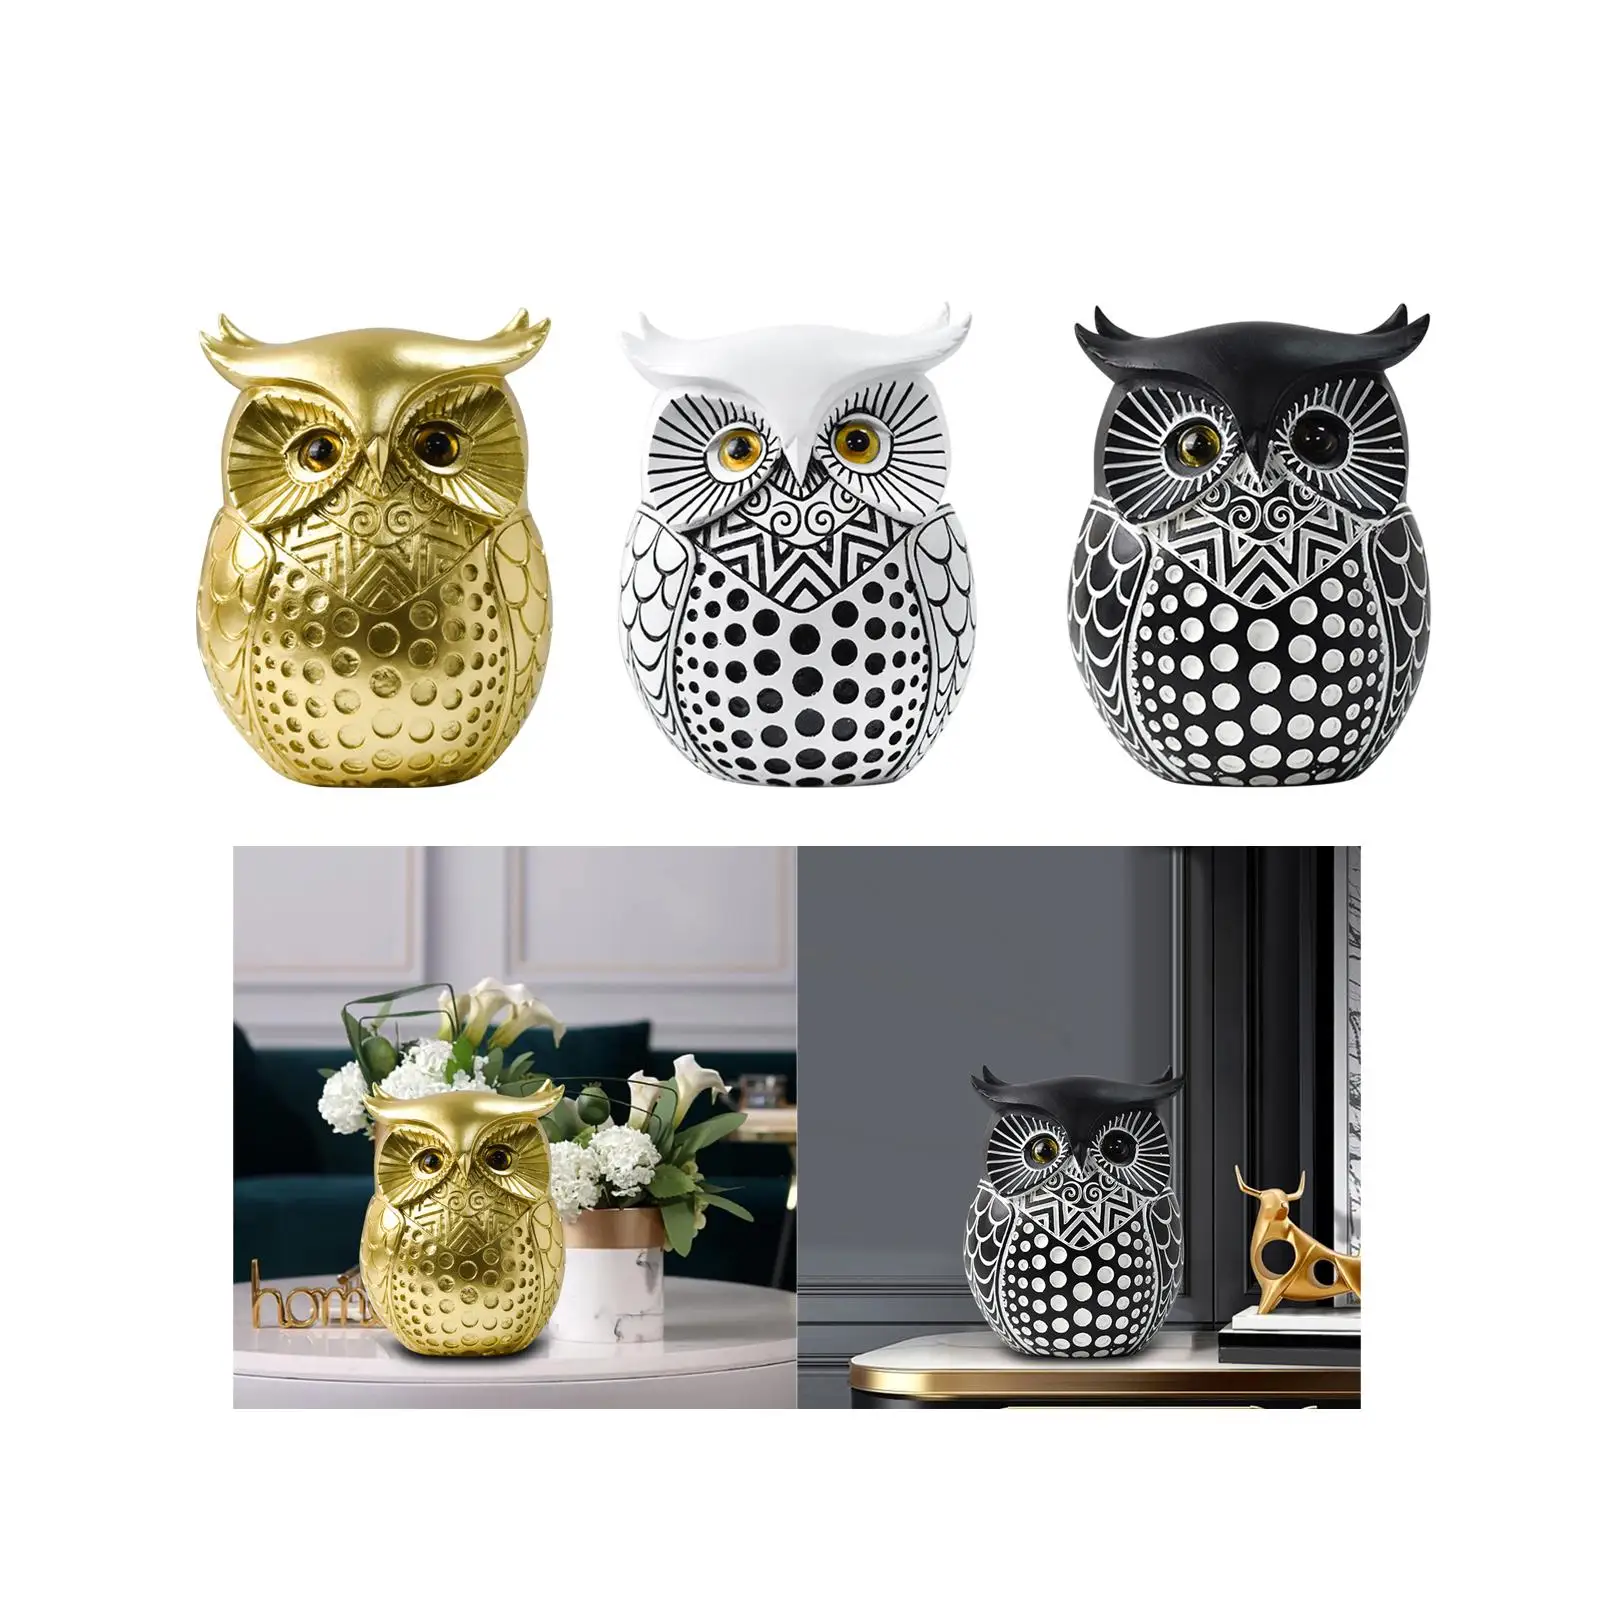 Owl Statue Home Decor Cute Crafts Animal Sculpture for Mantel Office Bedroom